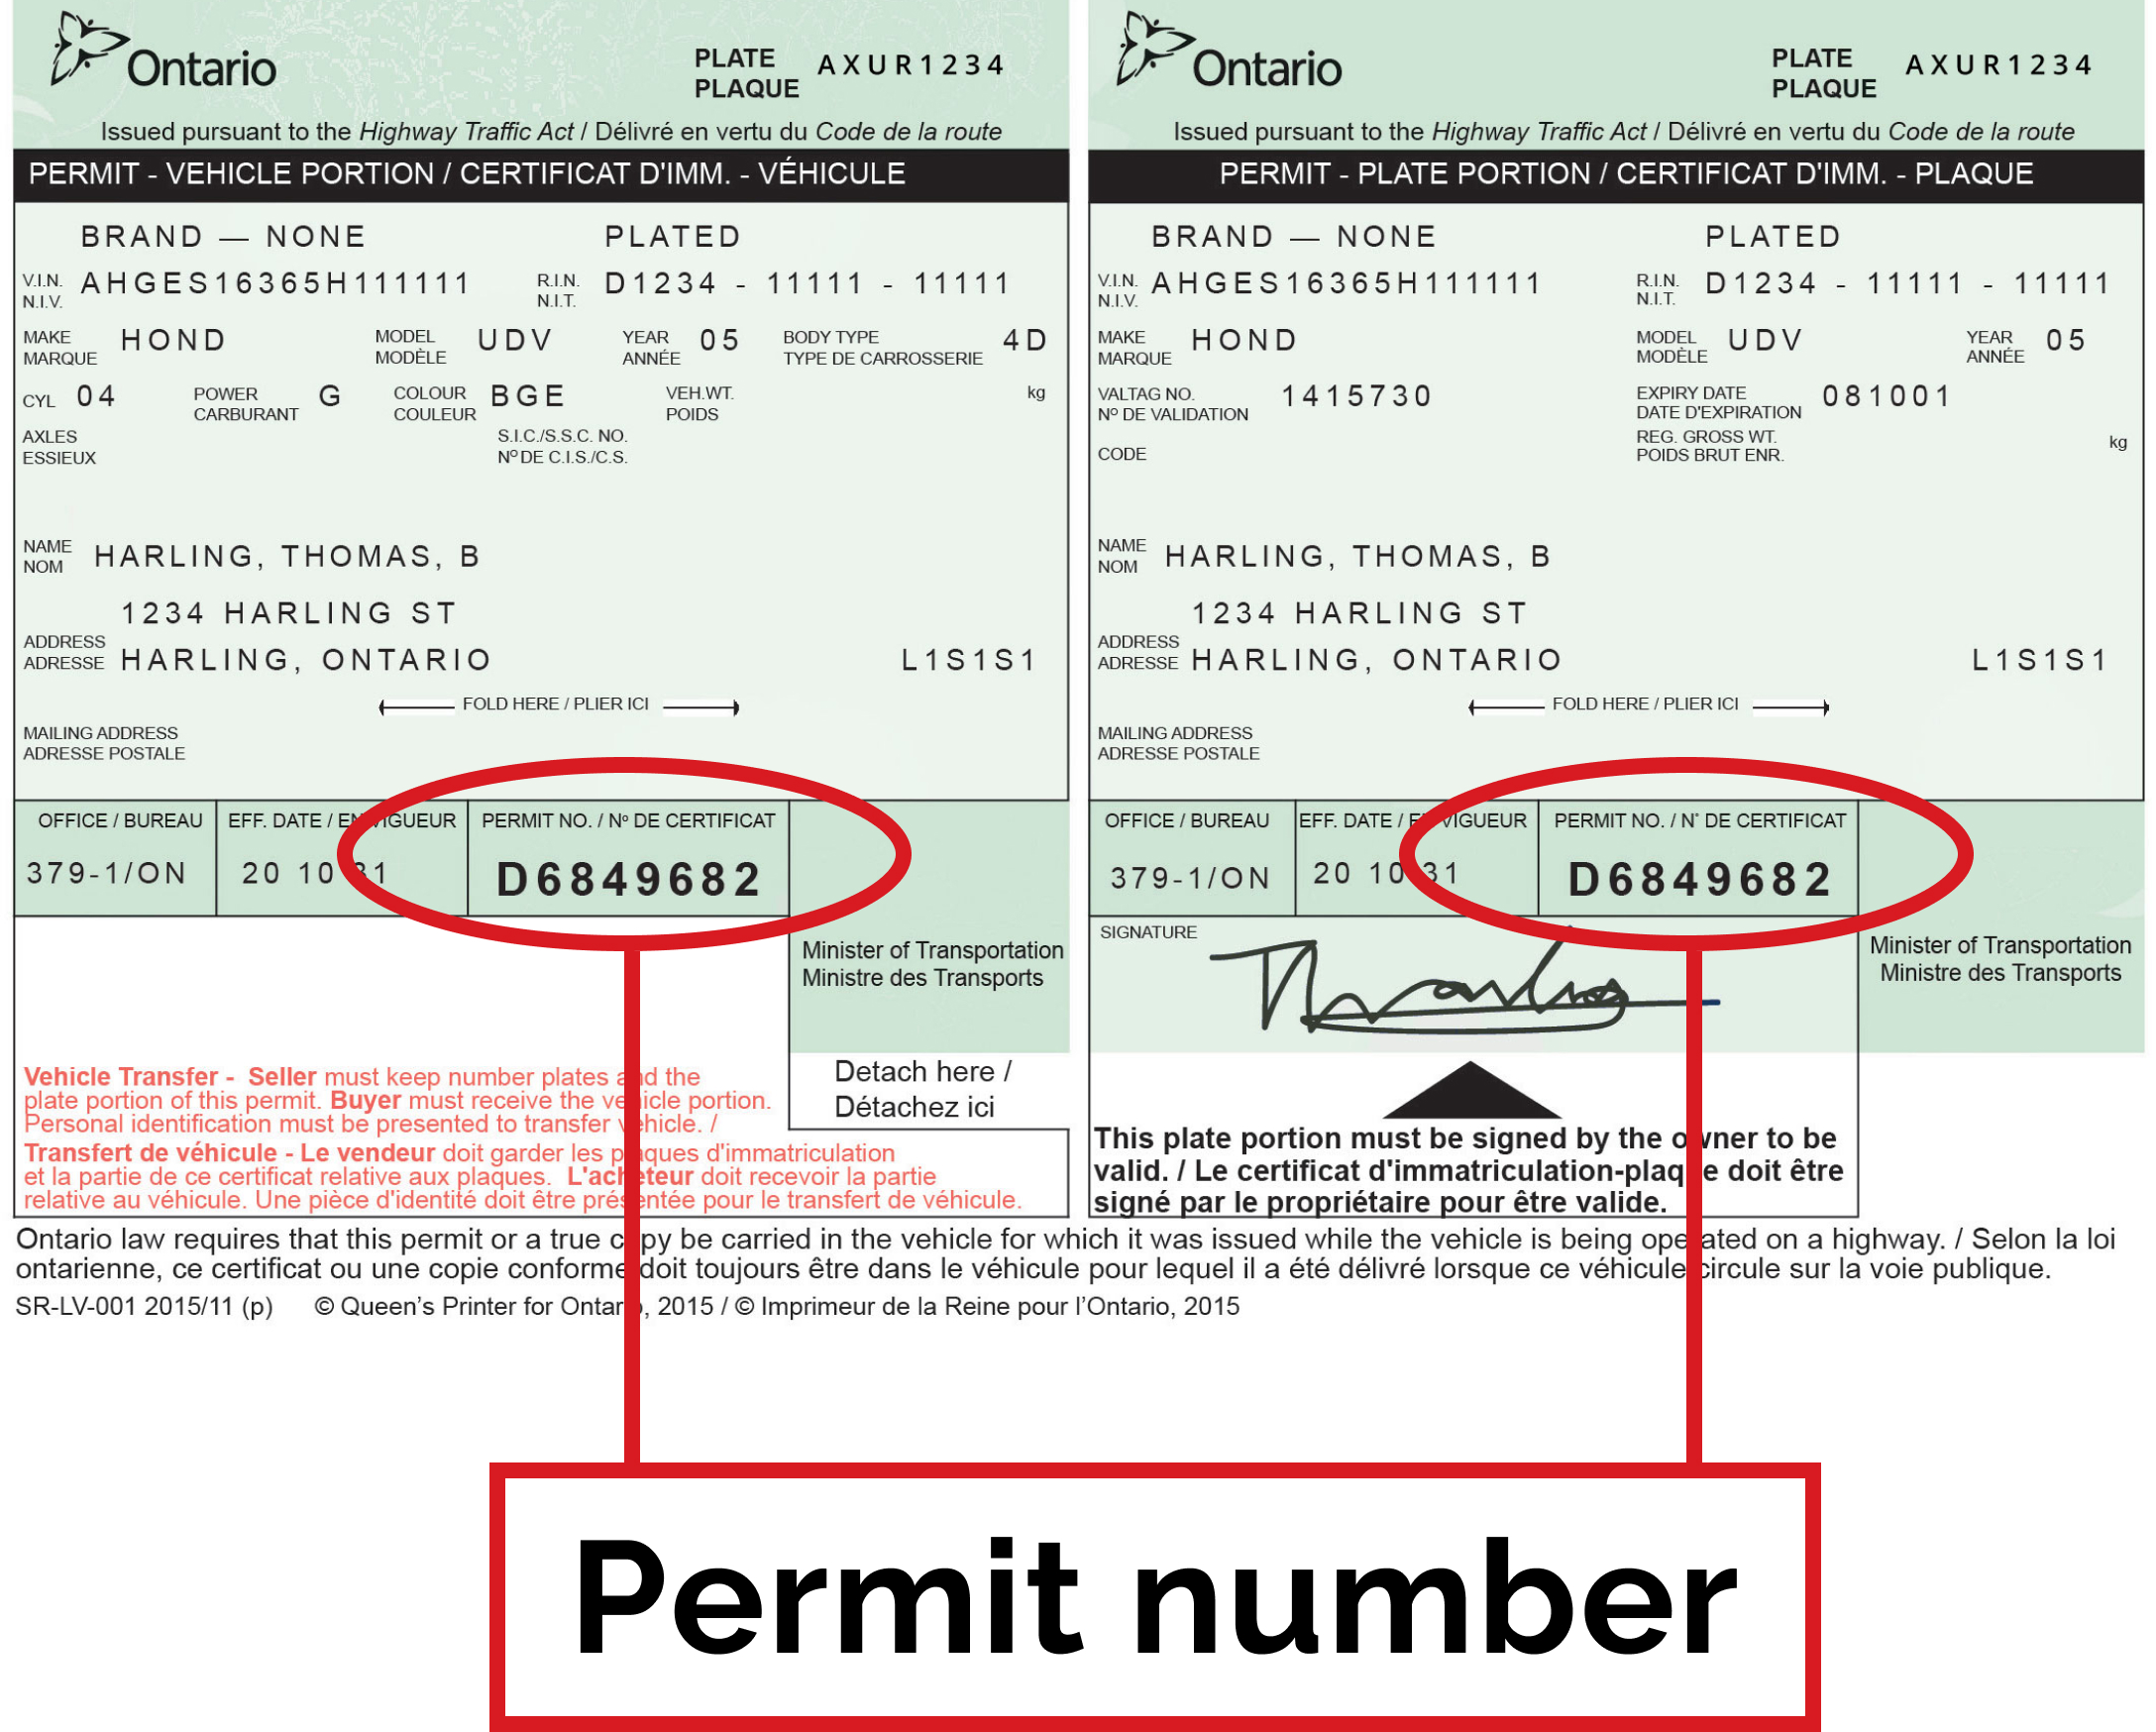 An image of the Ontario vehicle permit highlighting the permit number at the bottom.